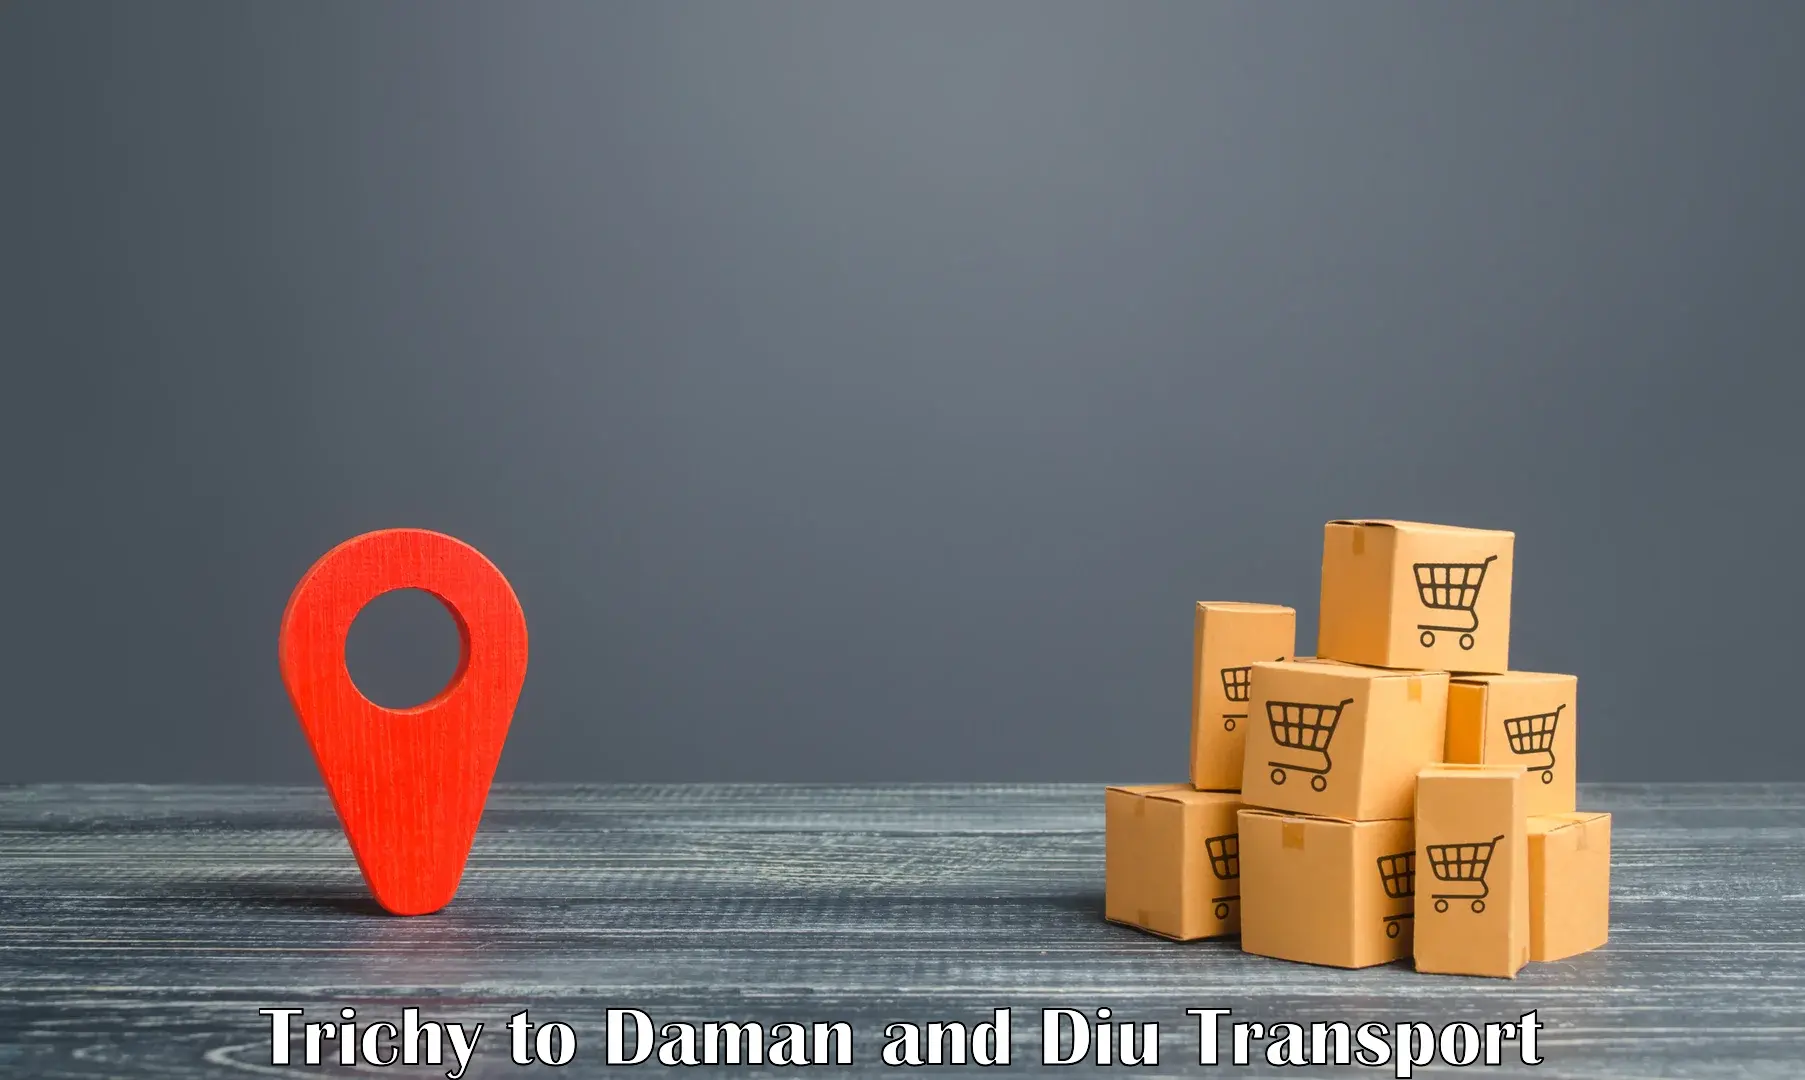 Lorry transport service Trichy to Daman and Diu